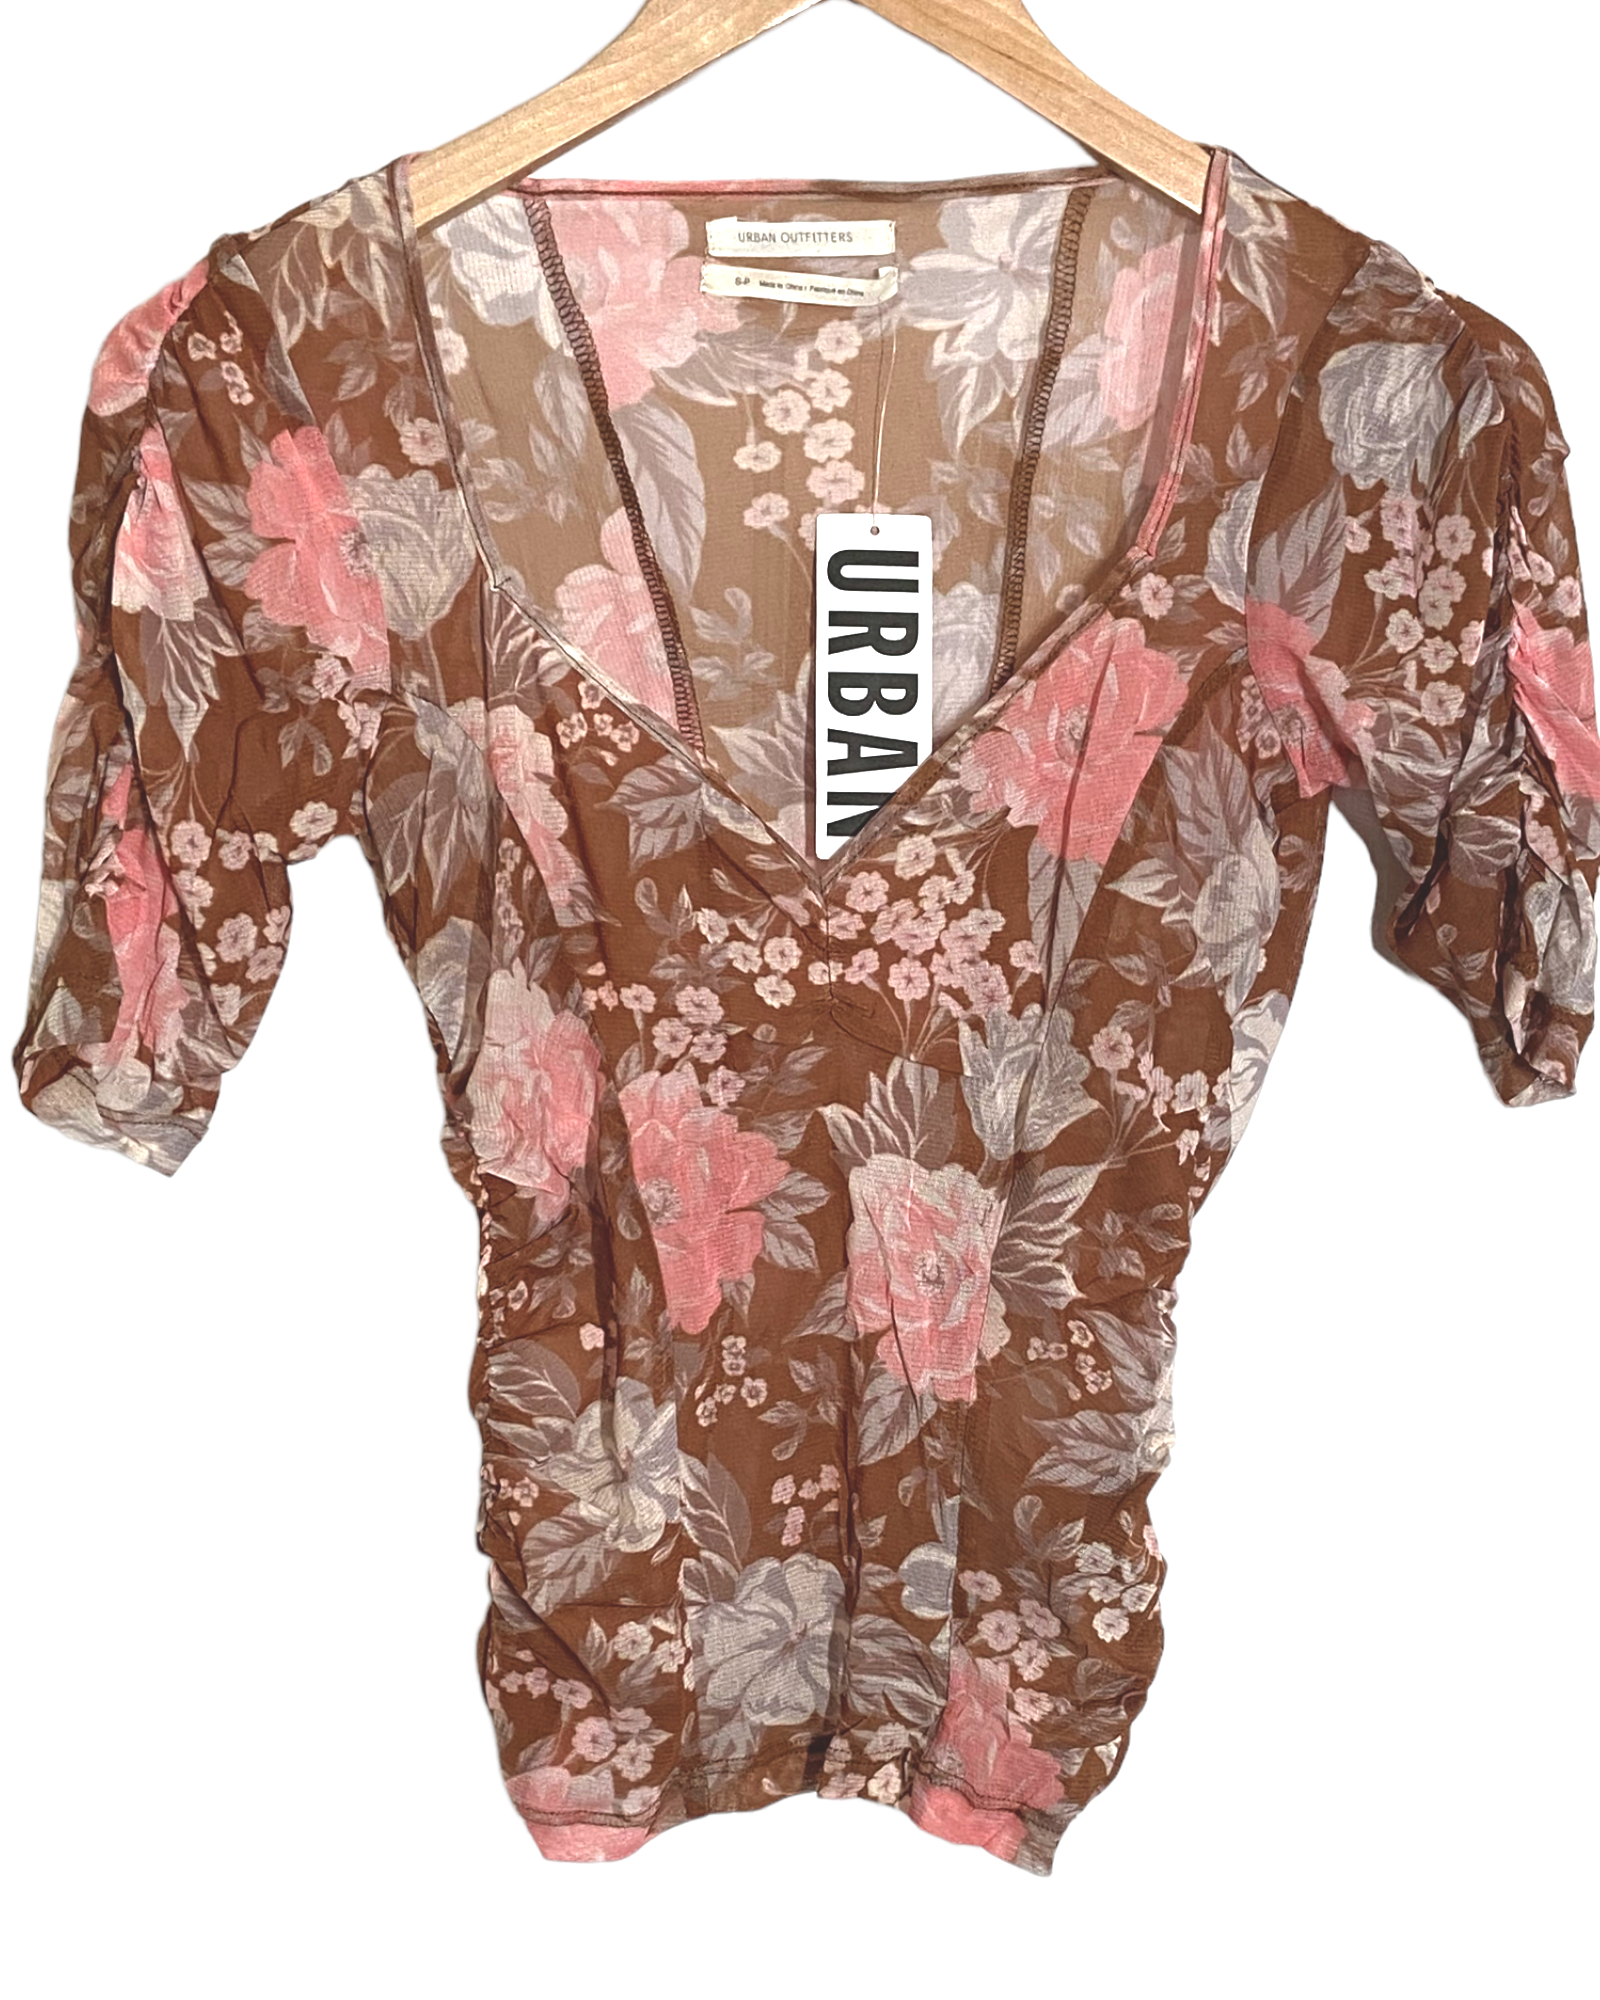 Light Spring URBAN OUTFITTERS brown pink floral ruched top